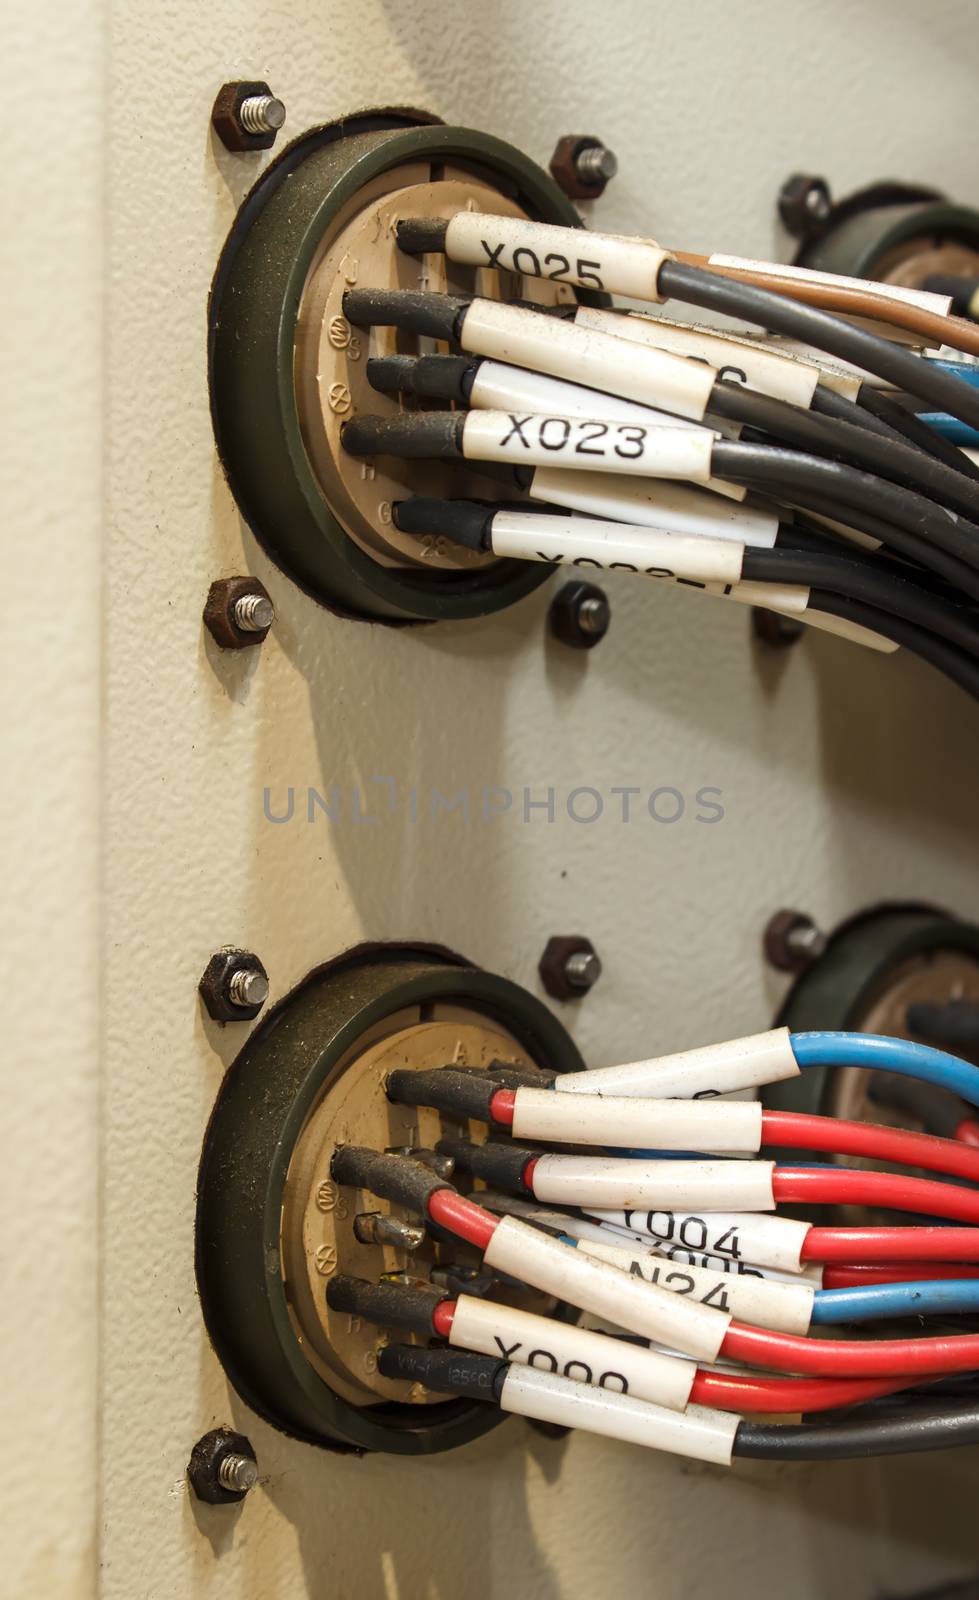 PLC's input wires used in industry.